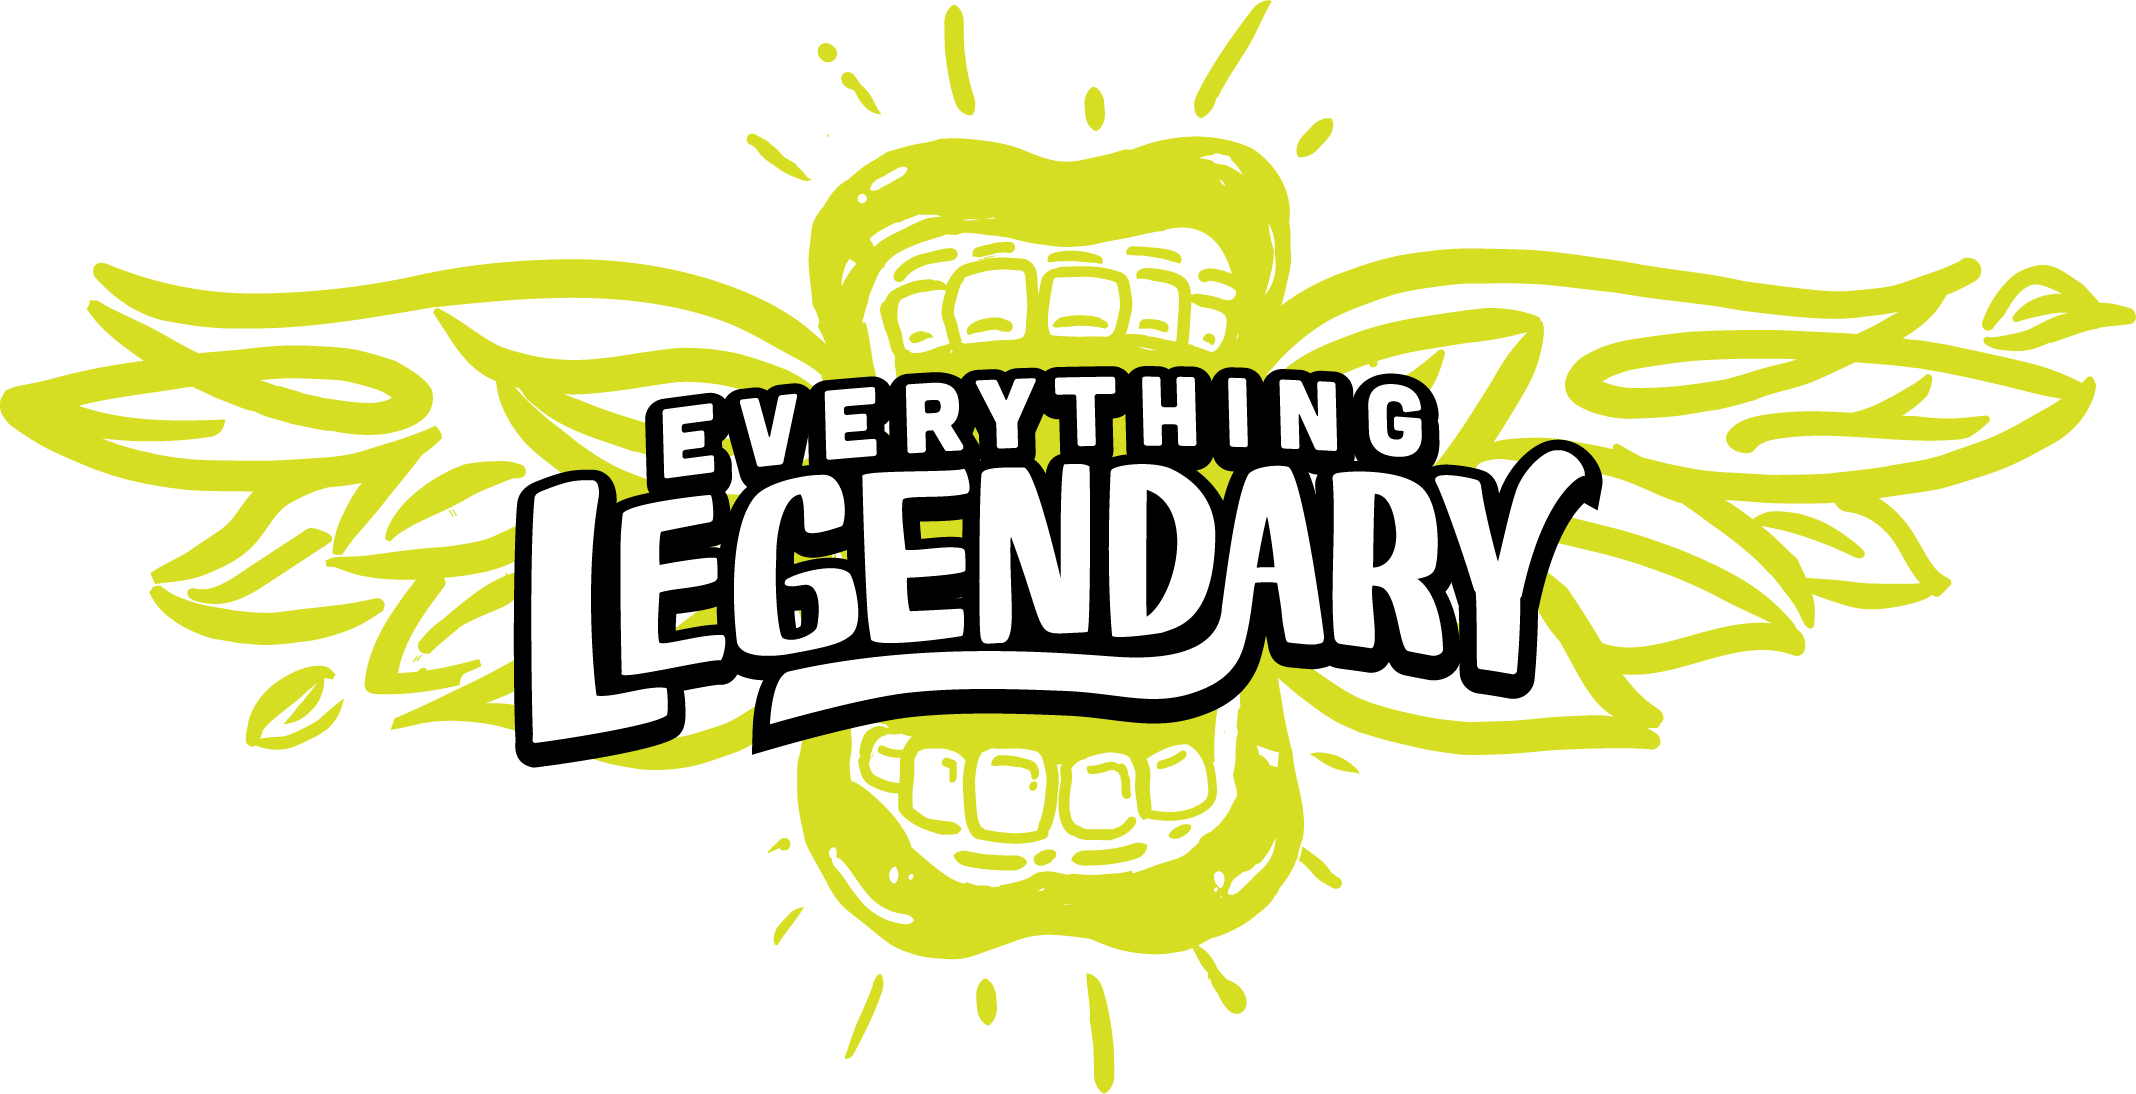 Everything Legendary is a Black-owned company that goes above and beyond the impossible. Socialize with them: golegendary.com, www.instagram.com/go_legendary/ and www.facebook.com/LegendaryBurgerCo